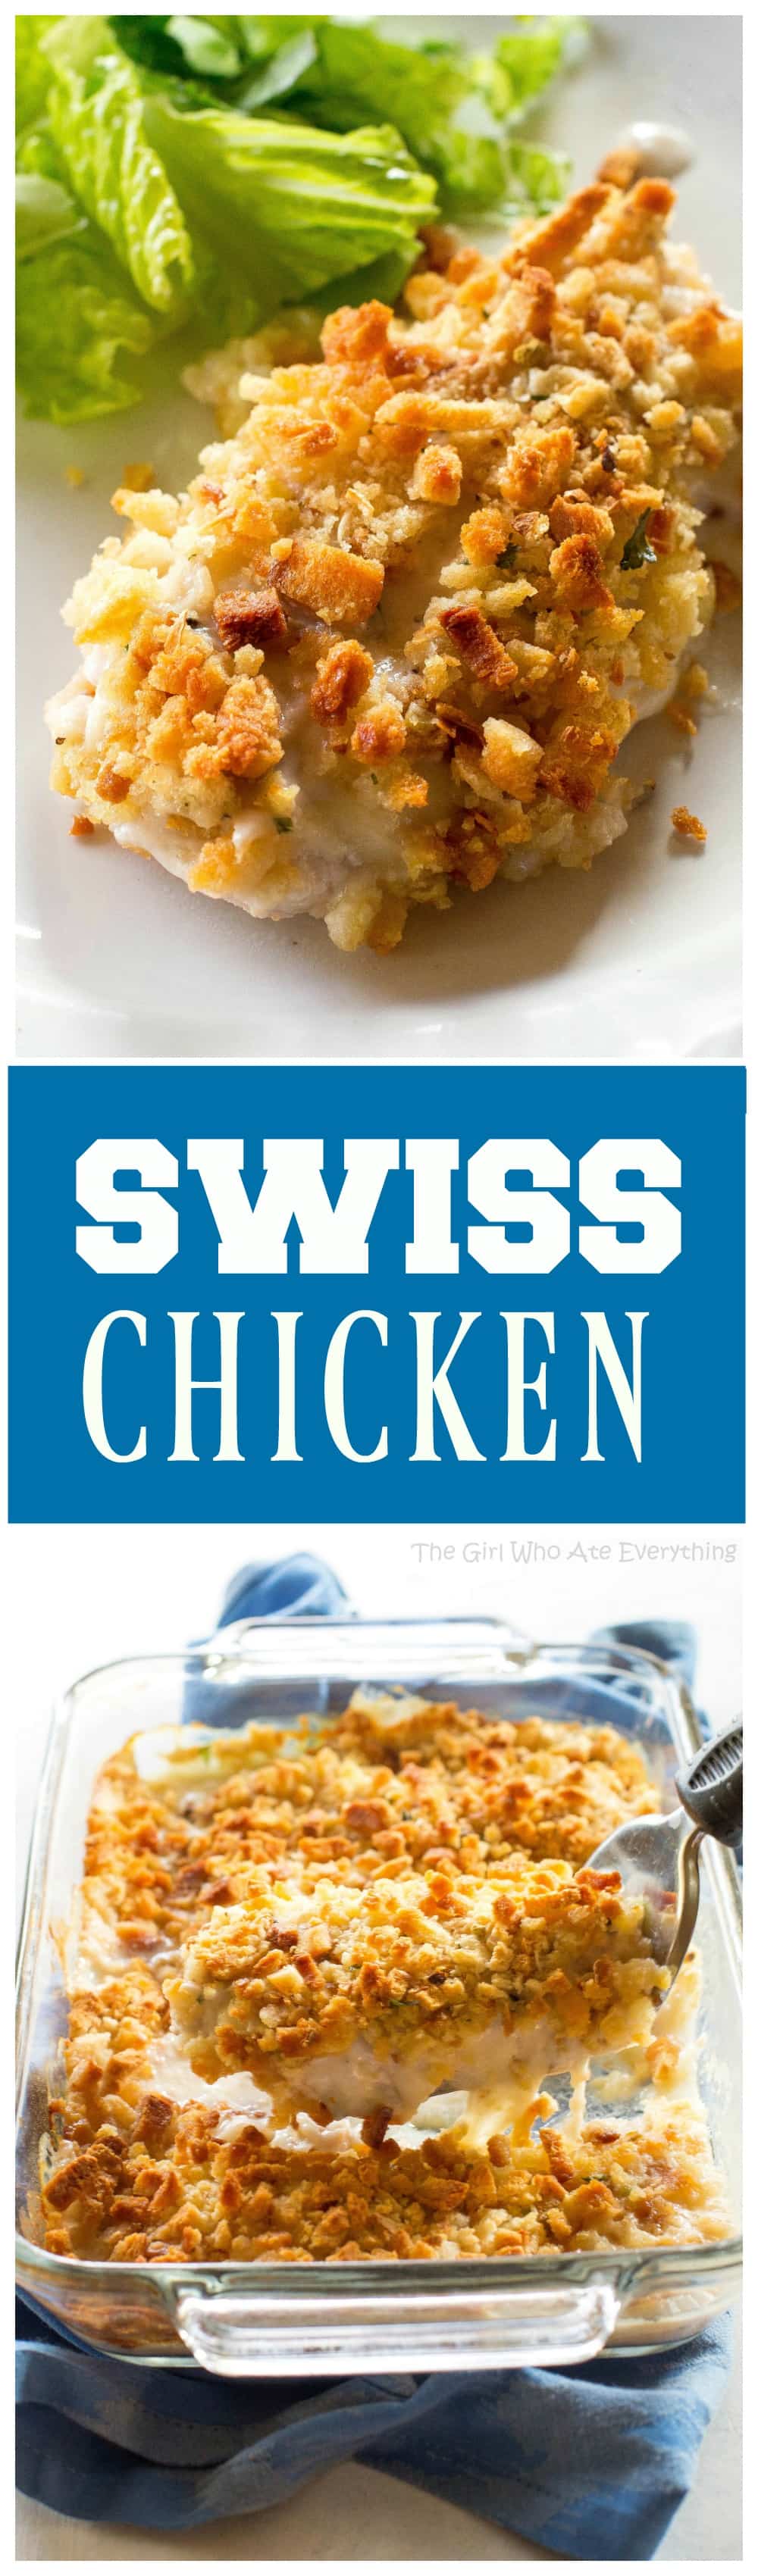 Swiss Chicken - an easy dinner for those busy nights. #easy #chicken #dinner #recipe #pantrymeals #casserole